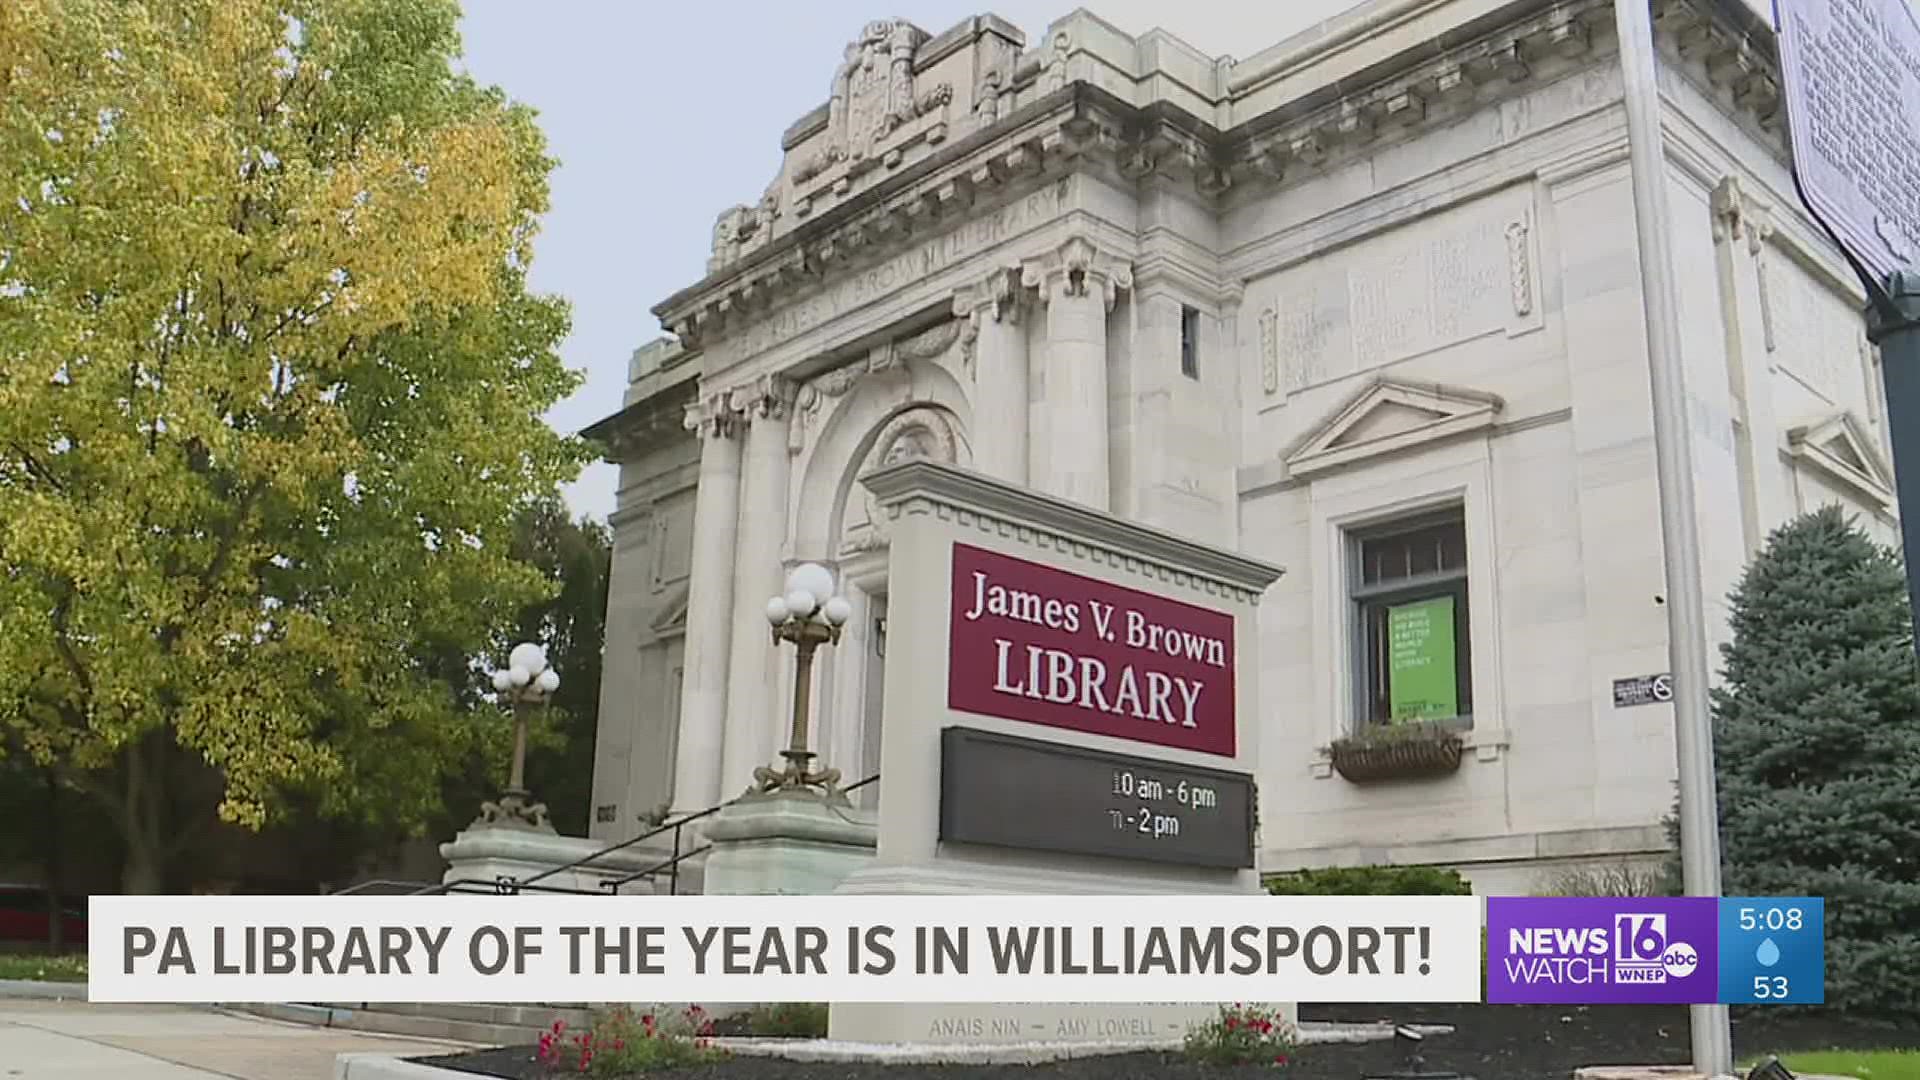 Out of more than 400 libraries in Pennsylvania, the James V. Brown Library in Williamsport was named the Library of the Year.